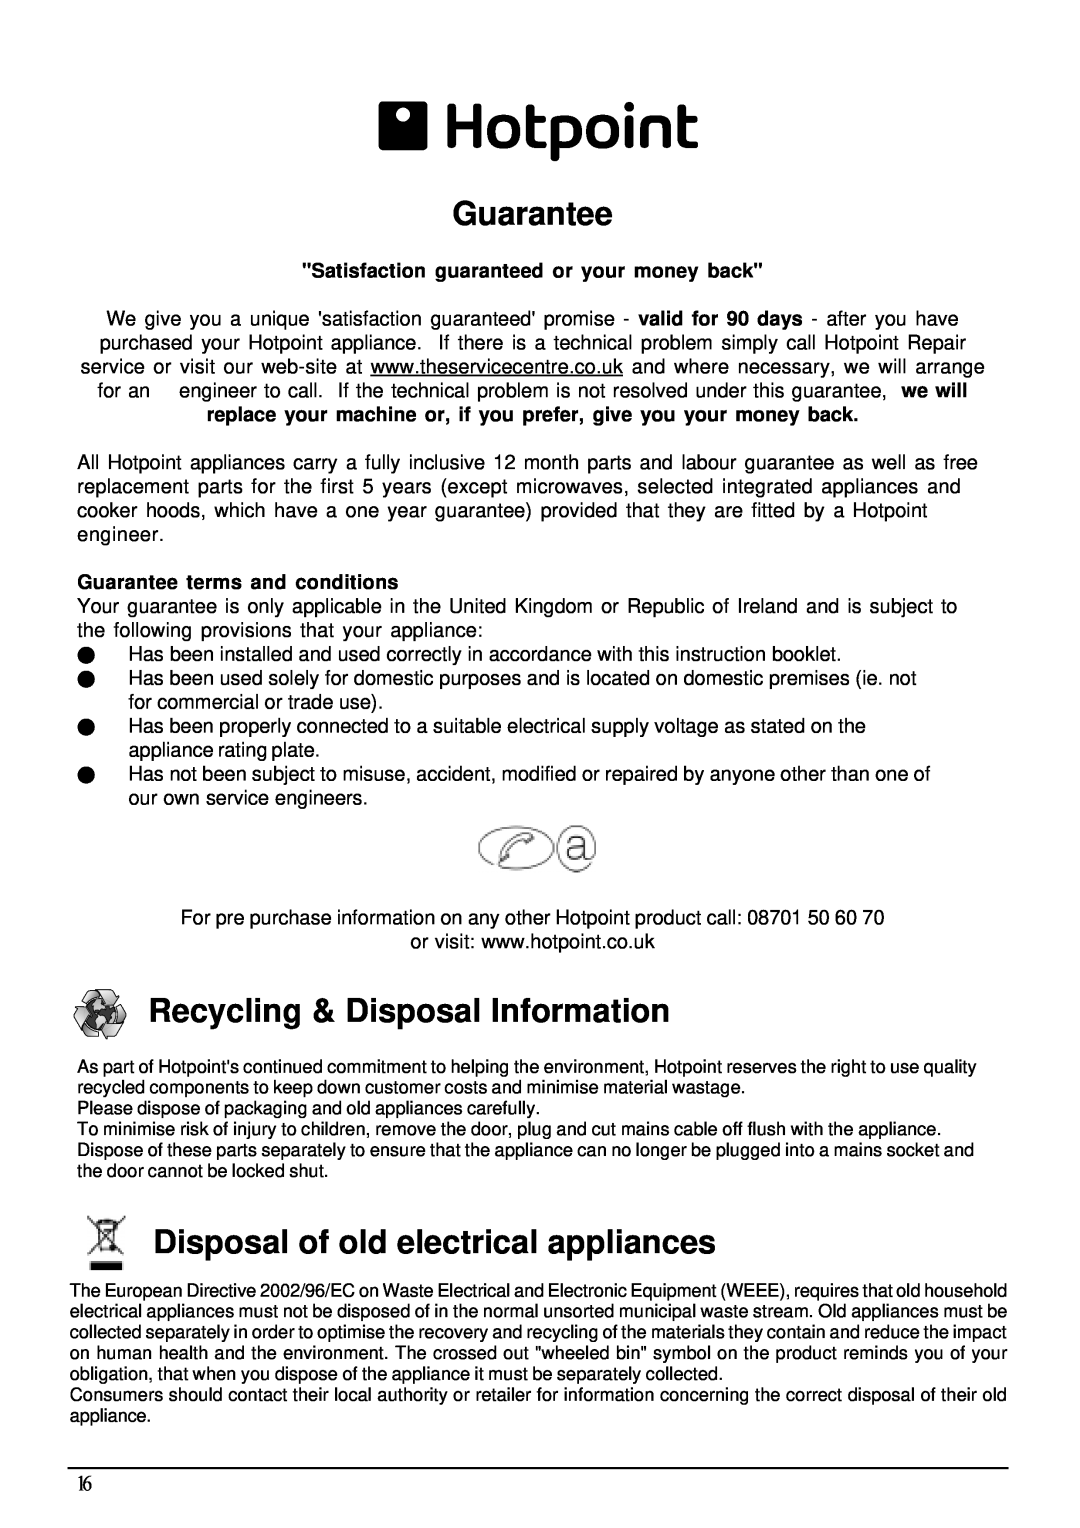 Hotpoint BFZ 700 manual Guarantee, Recycling & Disposal Information, Disposal of old electrical appliances 